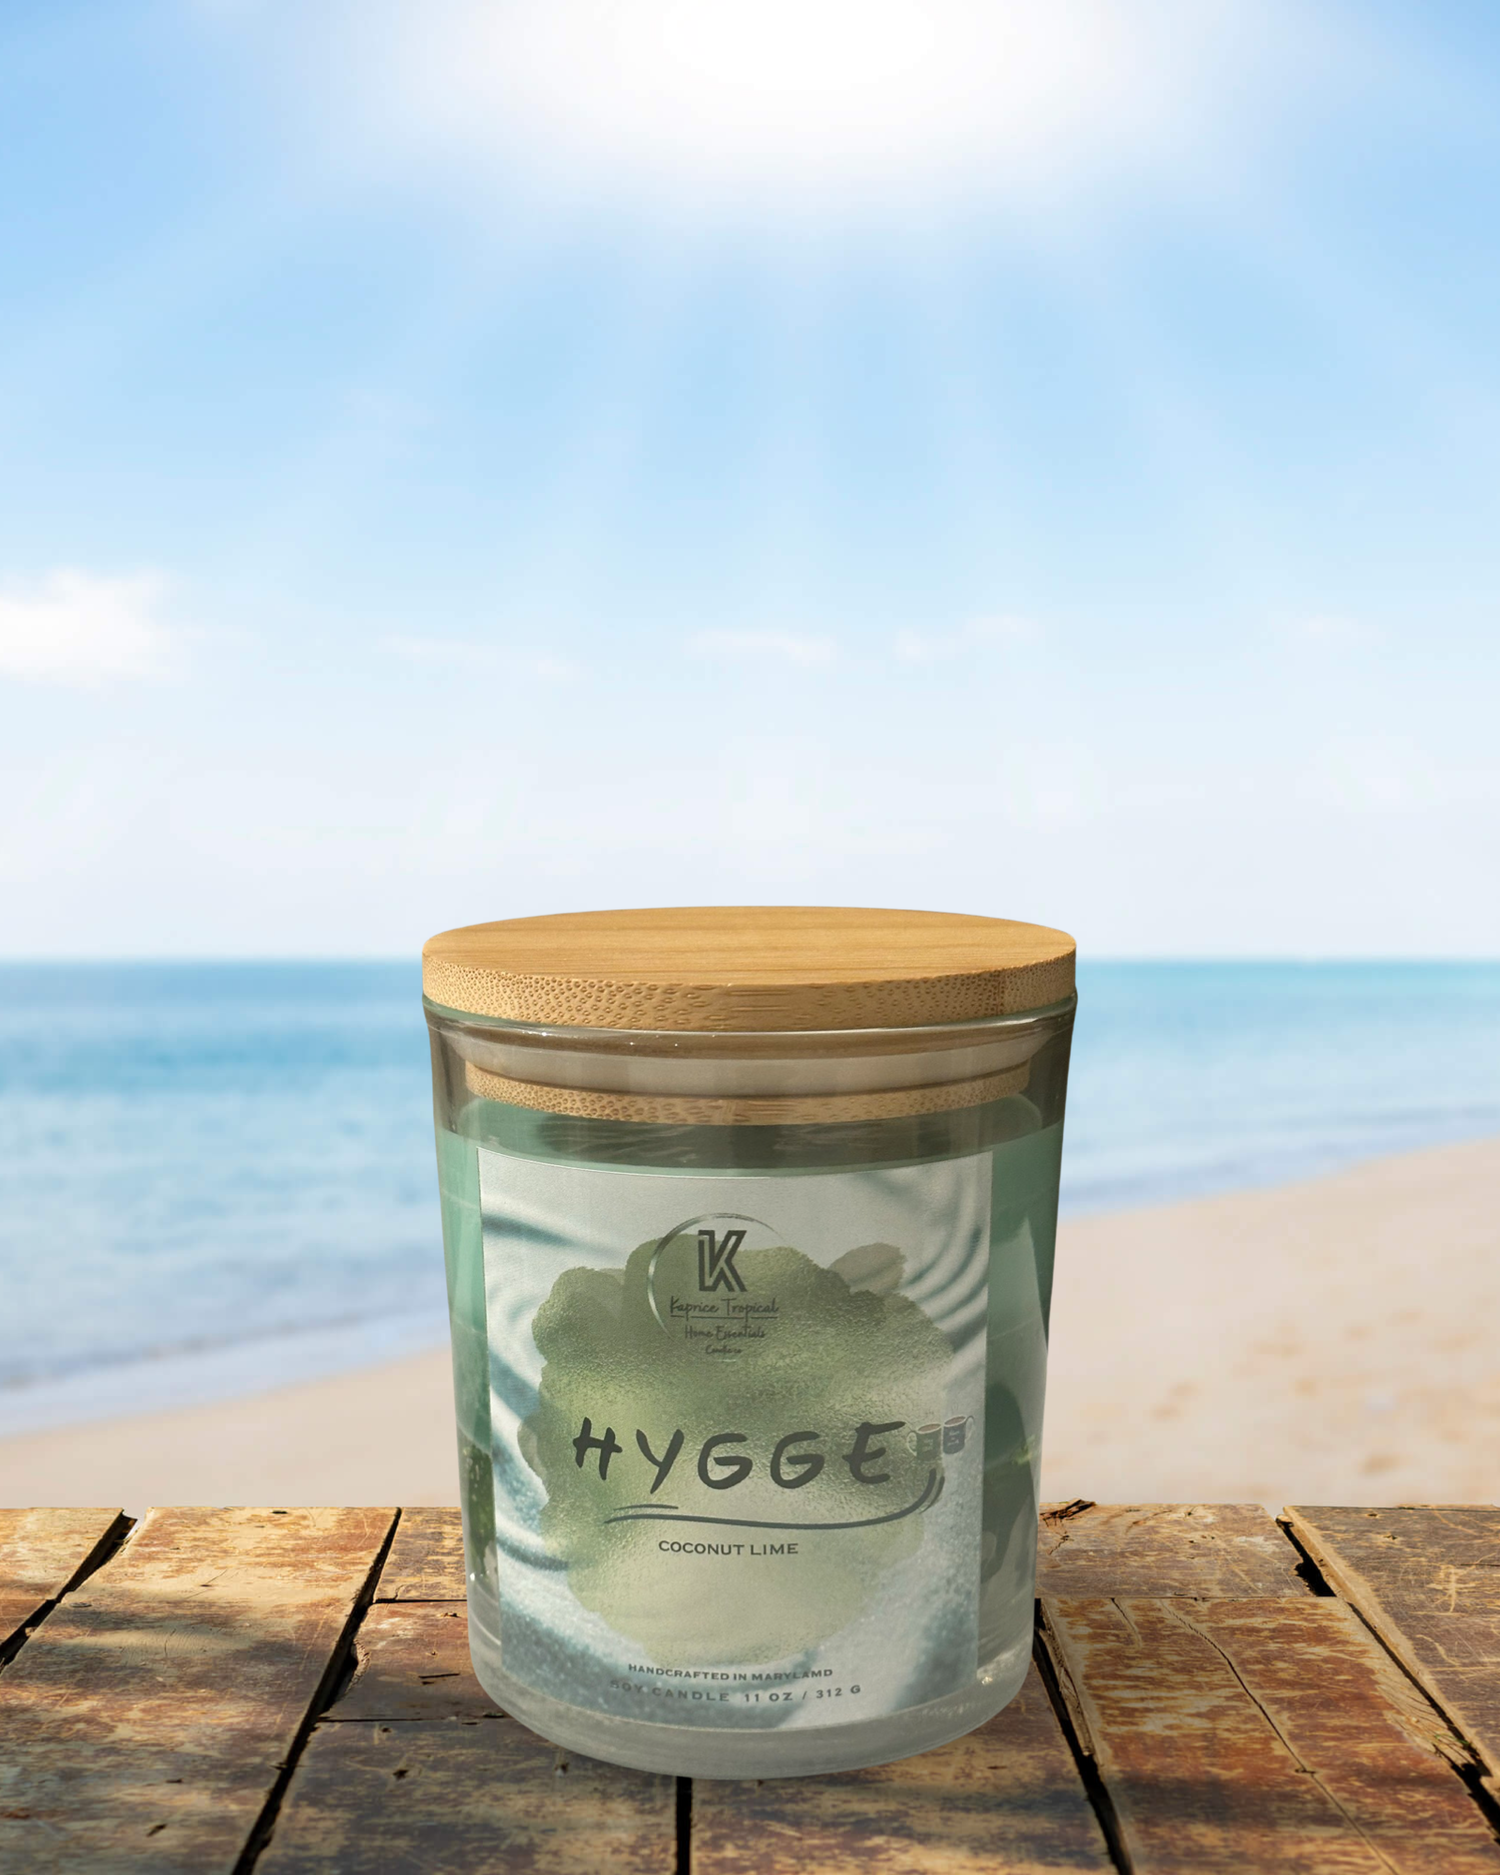 HYGGE - Scented Candles